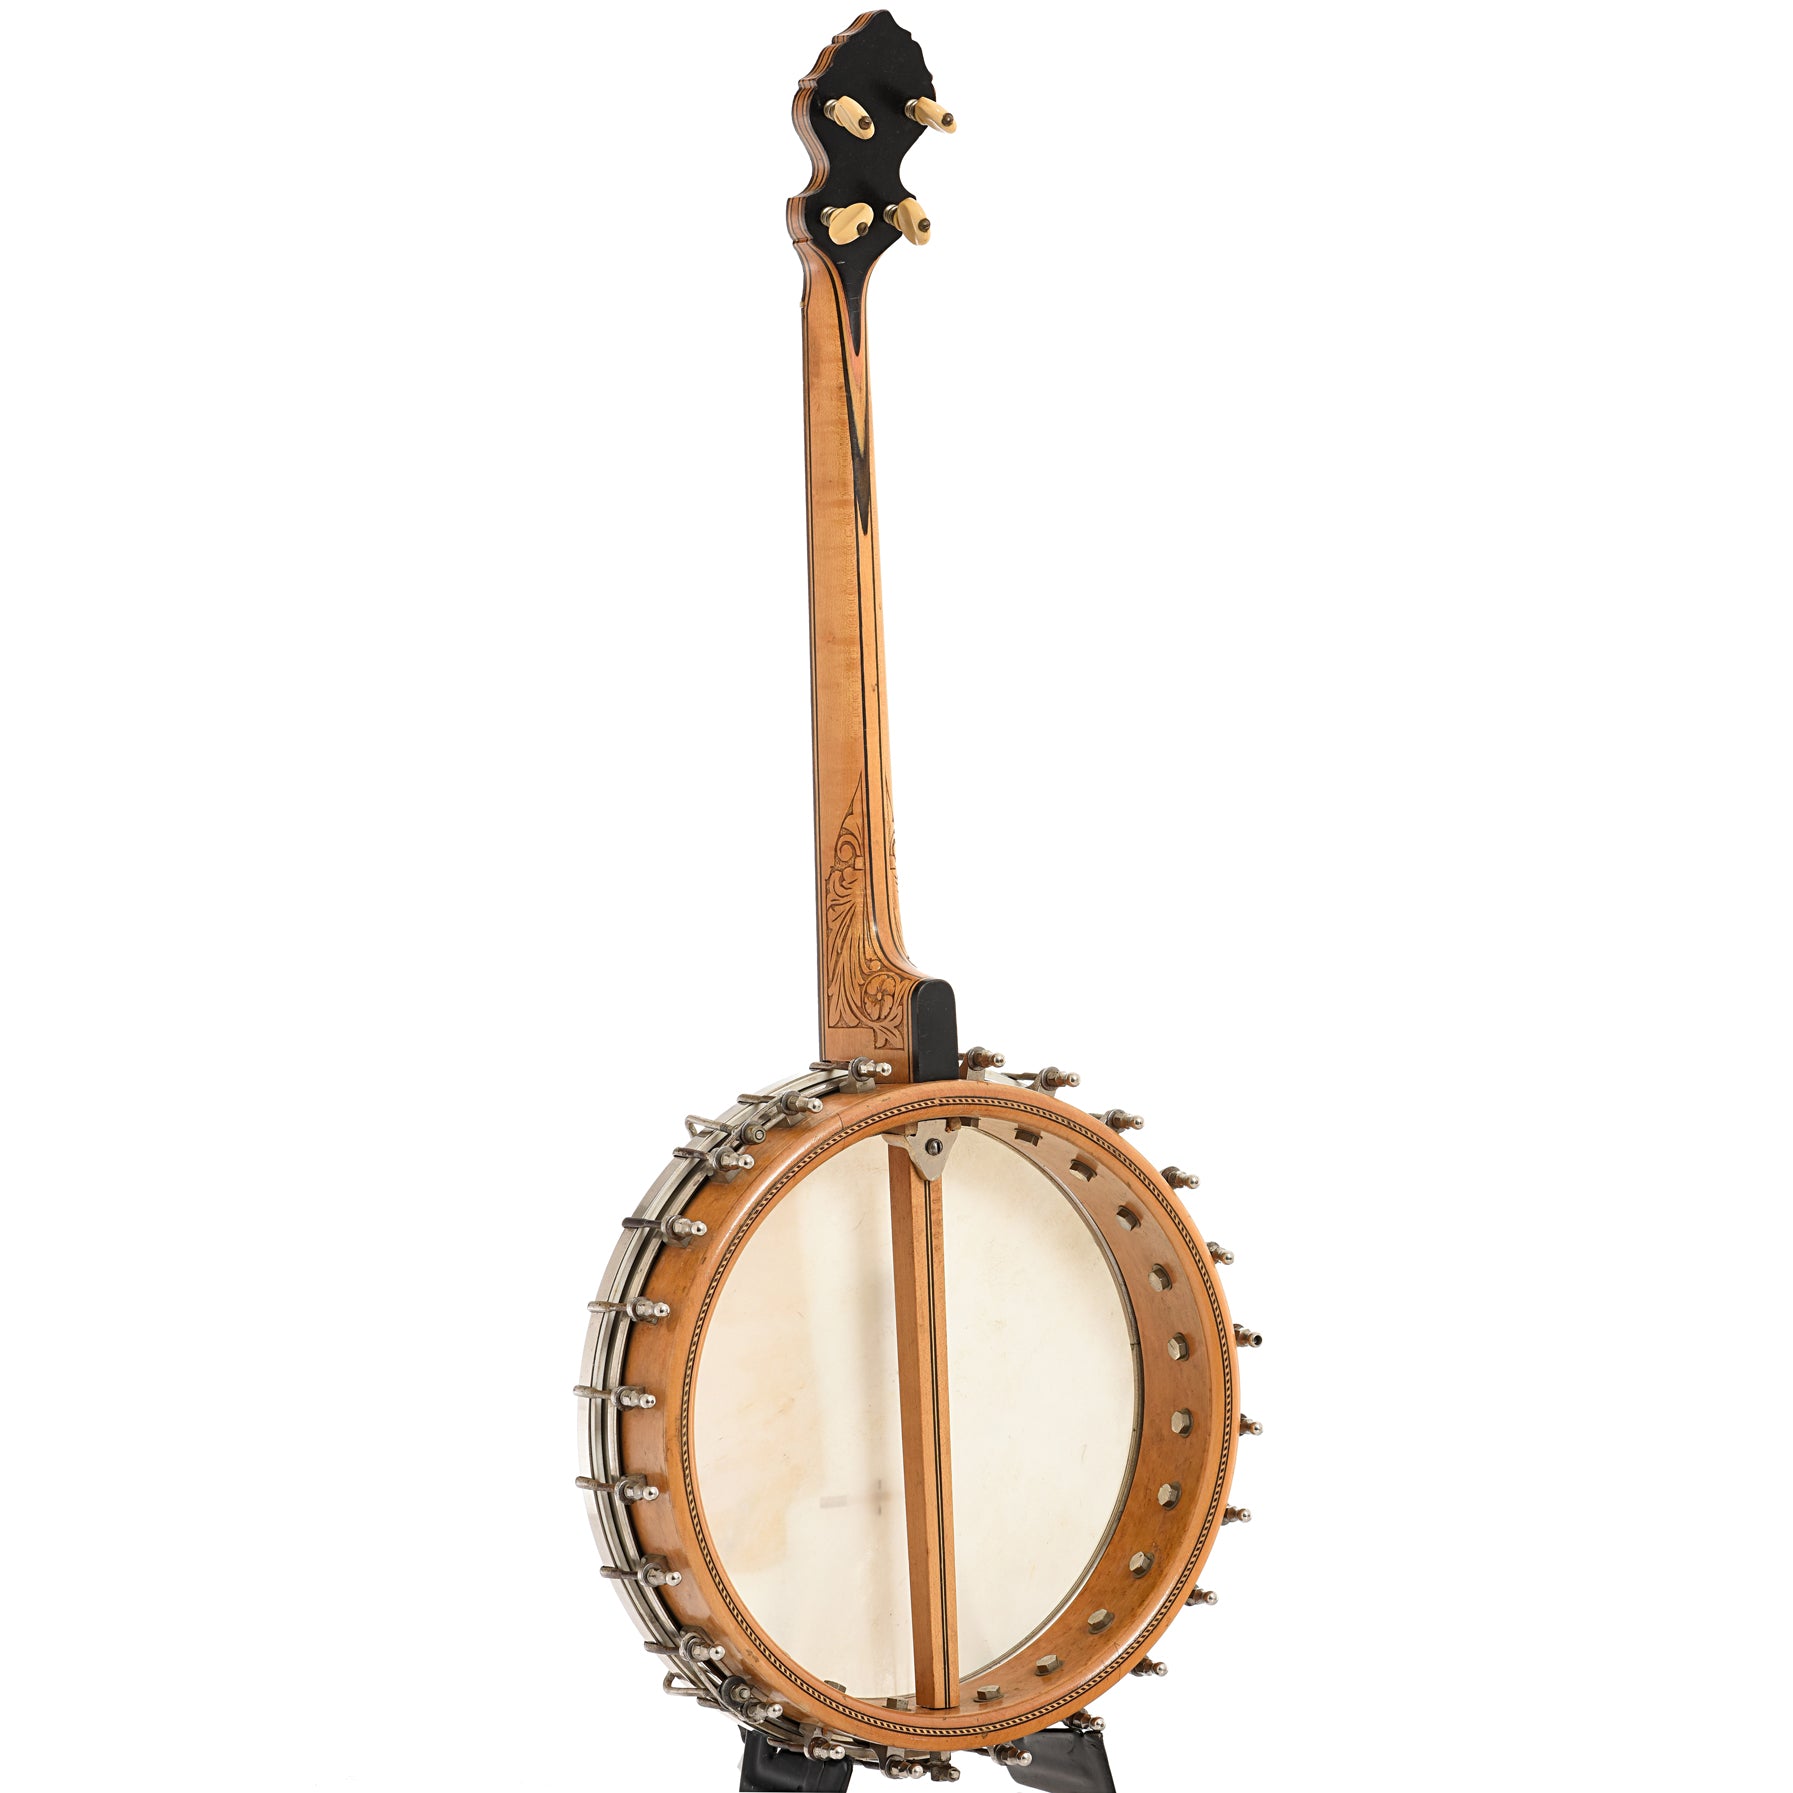 Full back and side of Orpheum No.2 Tenor Banjo (c.1920)